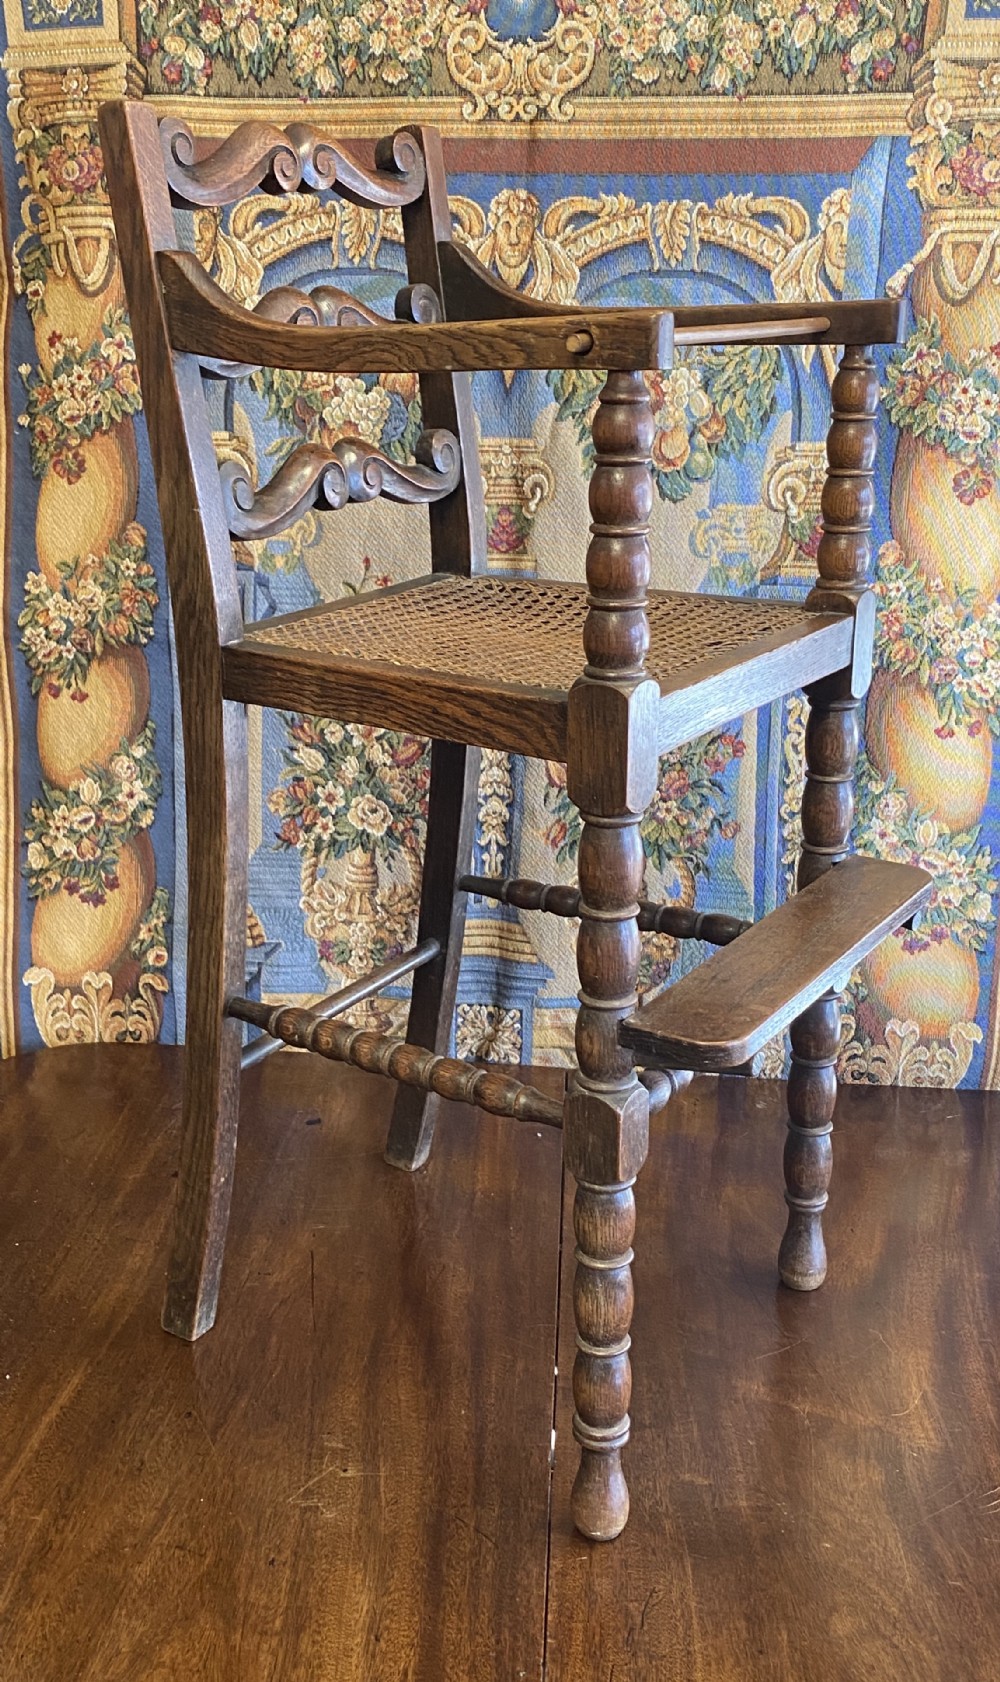 c19th childs high chair